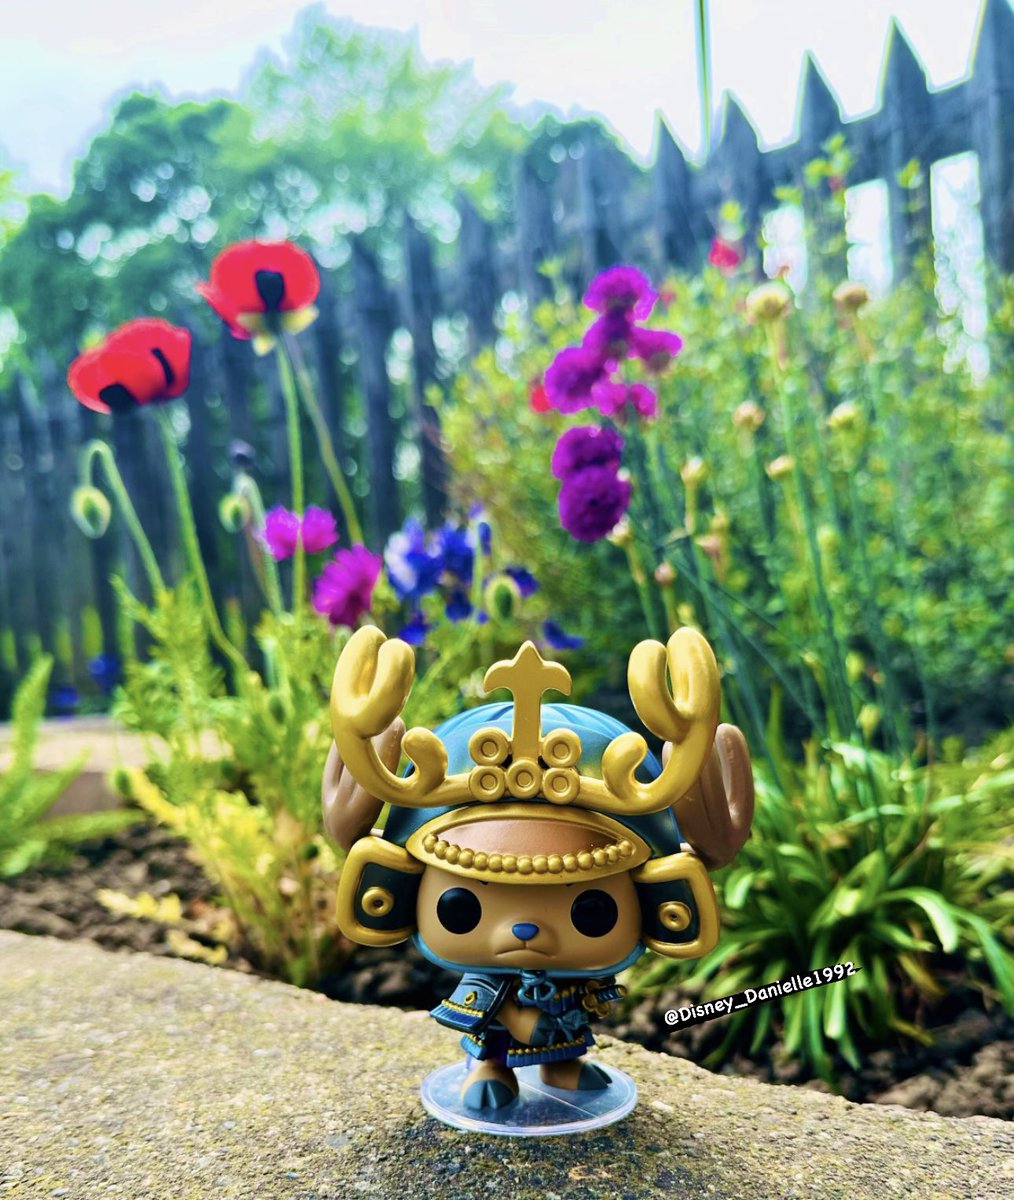 Armored Chopper chase! Absolutely love this POP! 😍 I won this last year & it’s been a cherished part of my collection ever since. ☺️

Hope everyone’s had a great weekend! 🍹

#FunkoPOPVinyl #MyFunkoStory #FunkoUnboxed #Funko 

@OriginalFunko @FunkoEurope @funko_funime